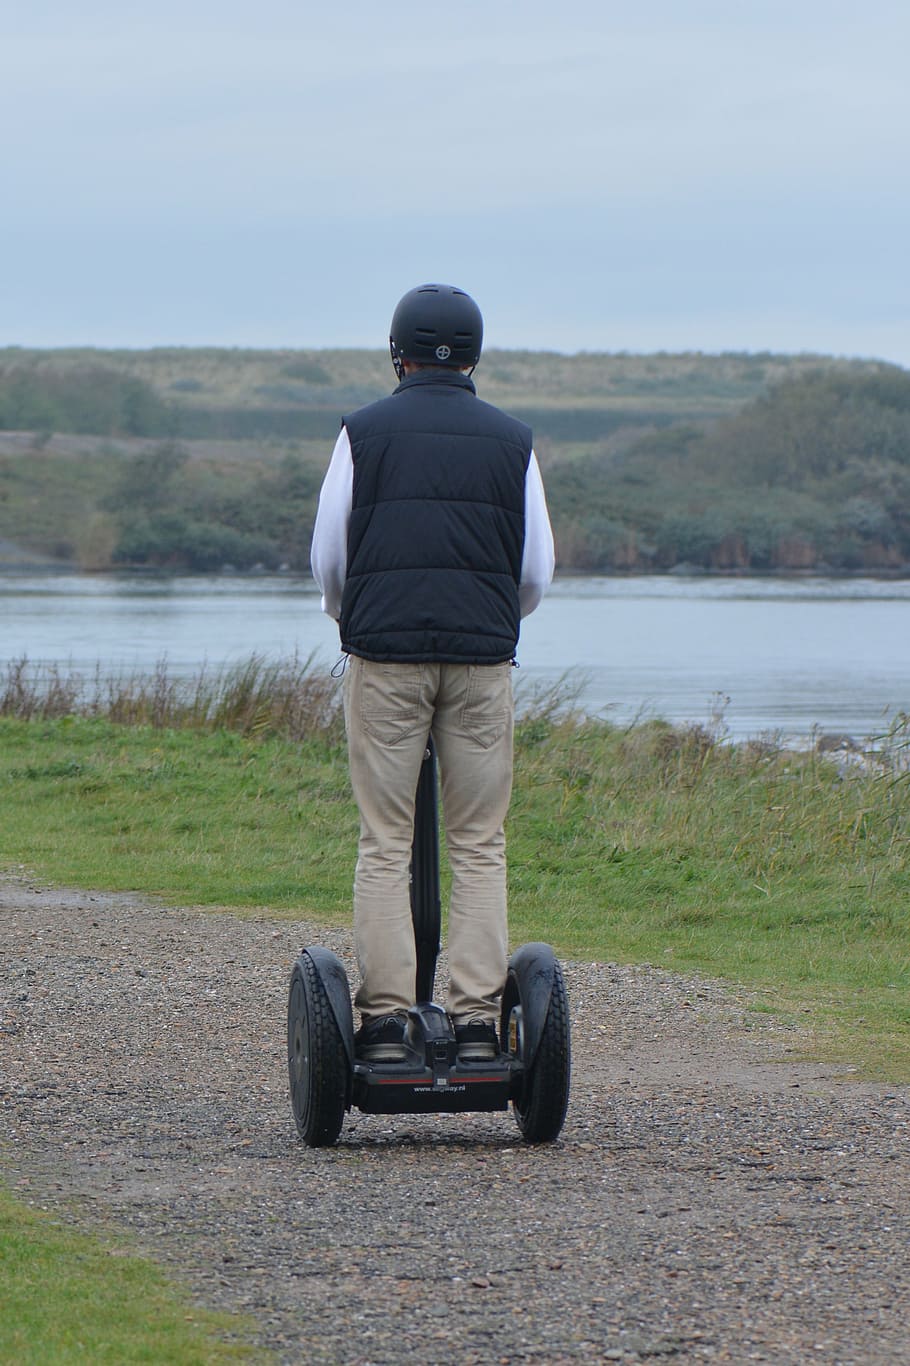 segway, getting there and getting around, man, rear view, real people, one person, leisure activity, lifestyles, transportation, full length